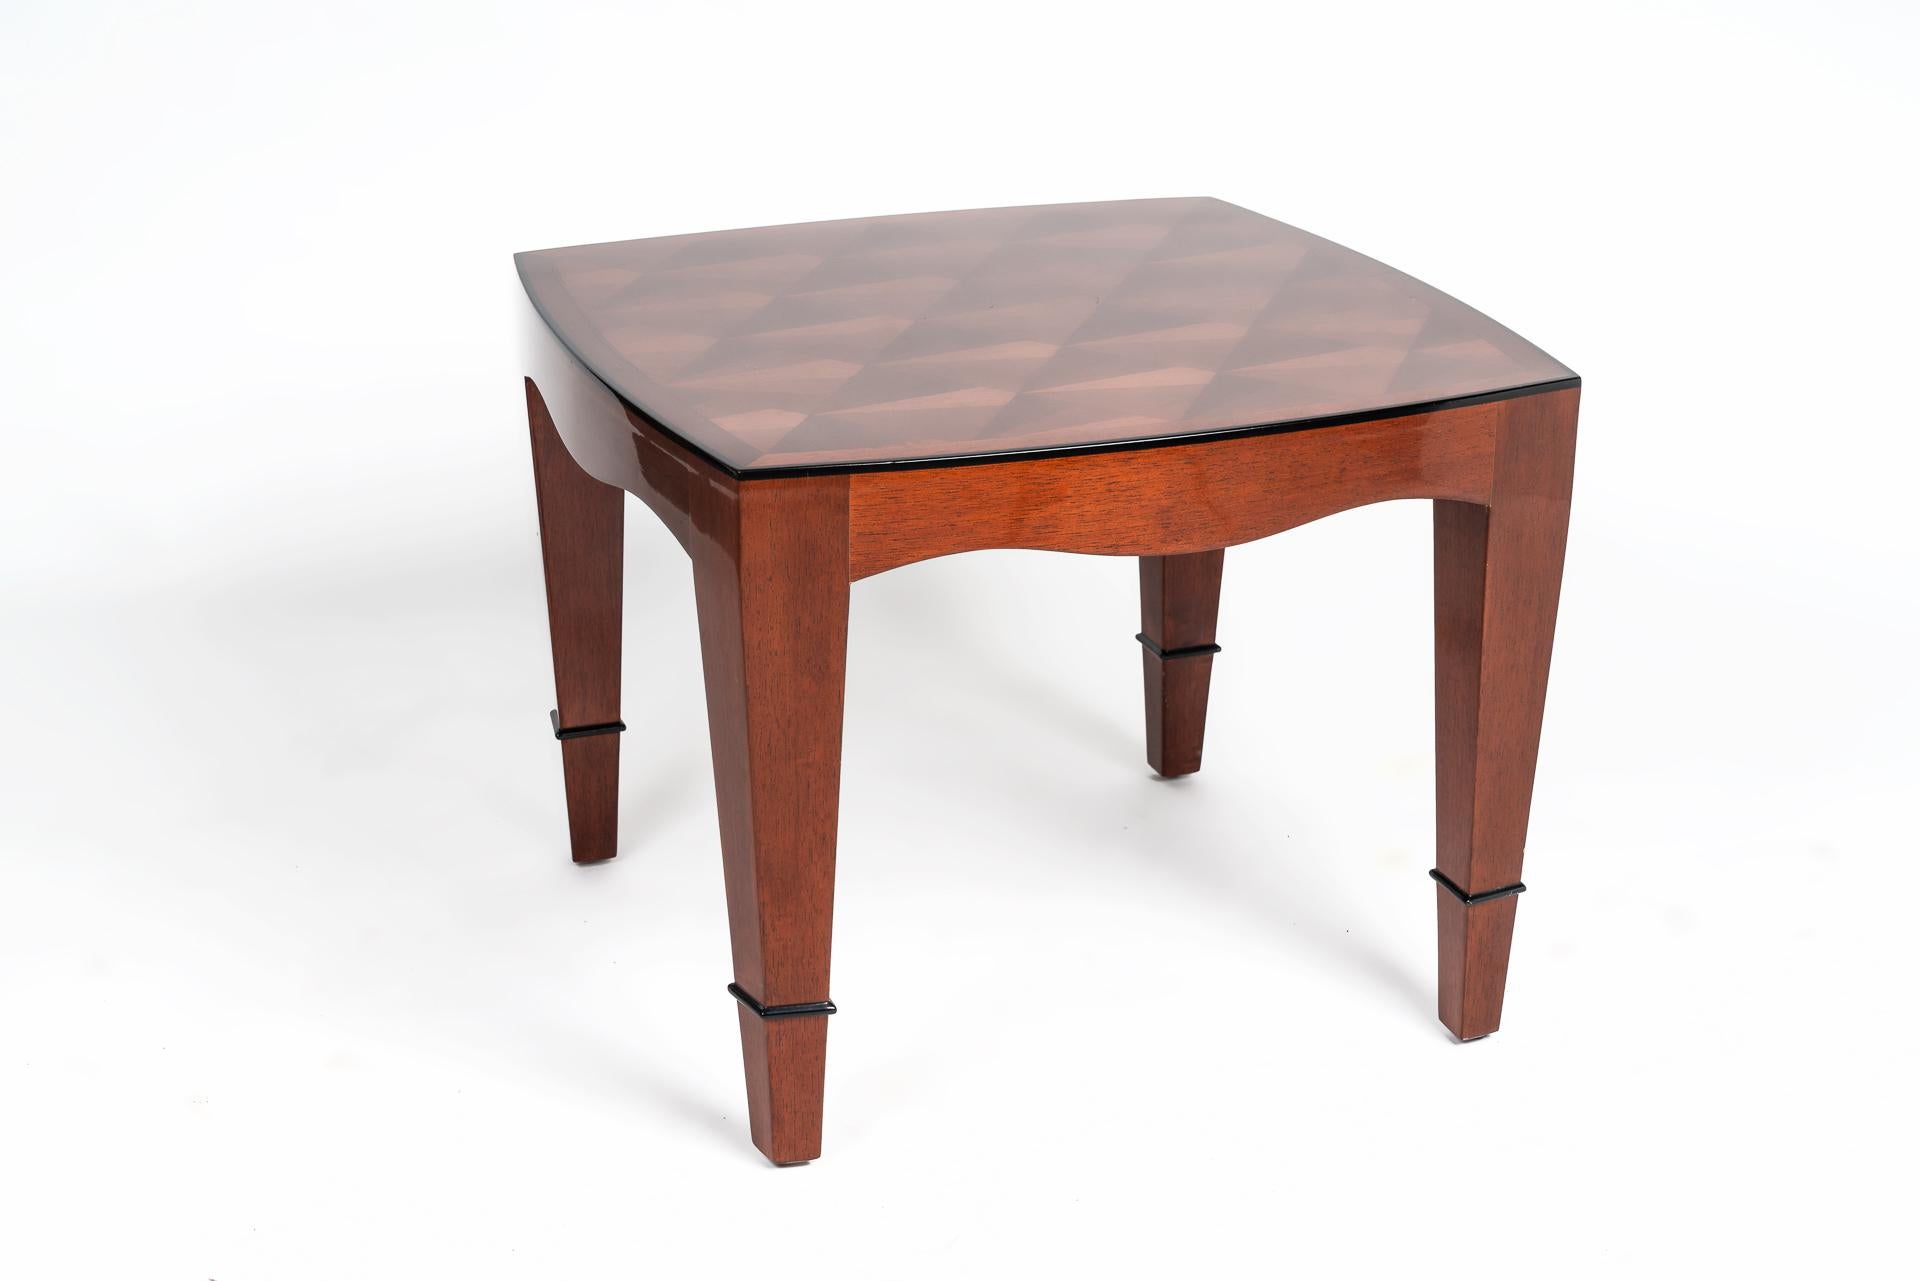 This beautiful pair of side tables shows the great art of inatsia work. The side tables are made of mahogany wood and on the table surface the inlay work is found in a fan-shaped form. The design of the table is rounded off by black details on the